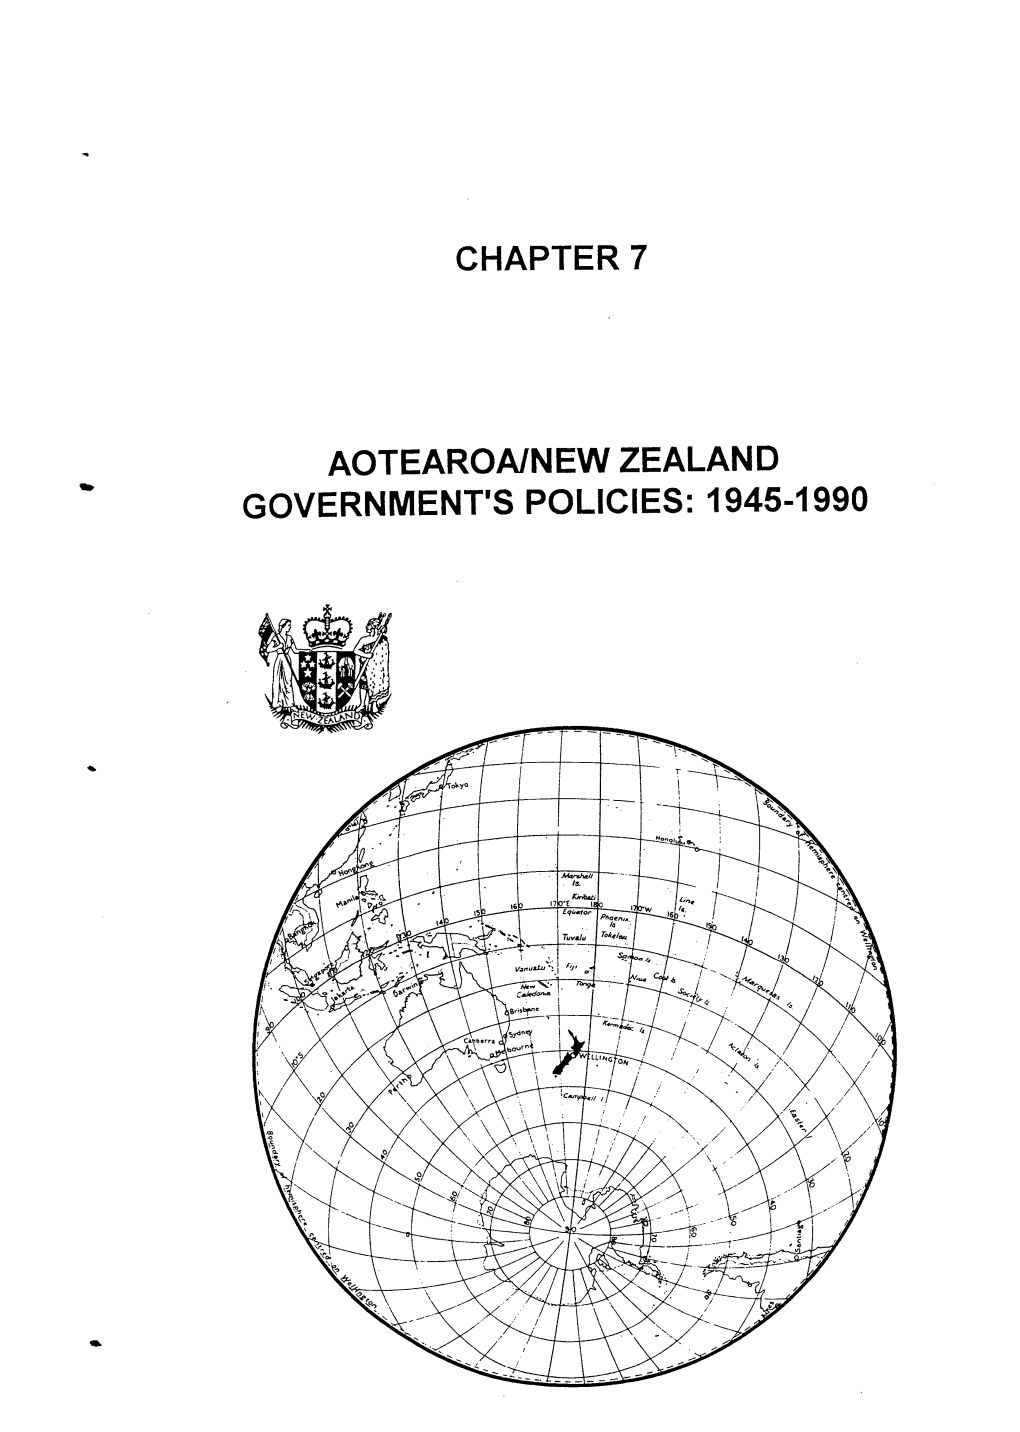 Chapter 7 Aotearoainew Zealand Government's Policies: 1945-1990